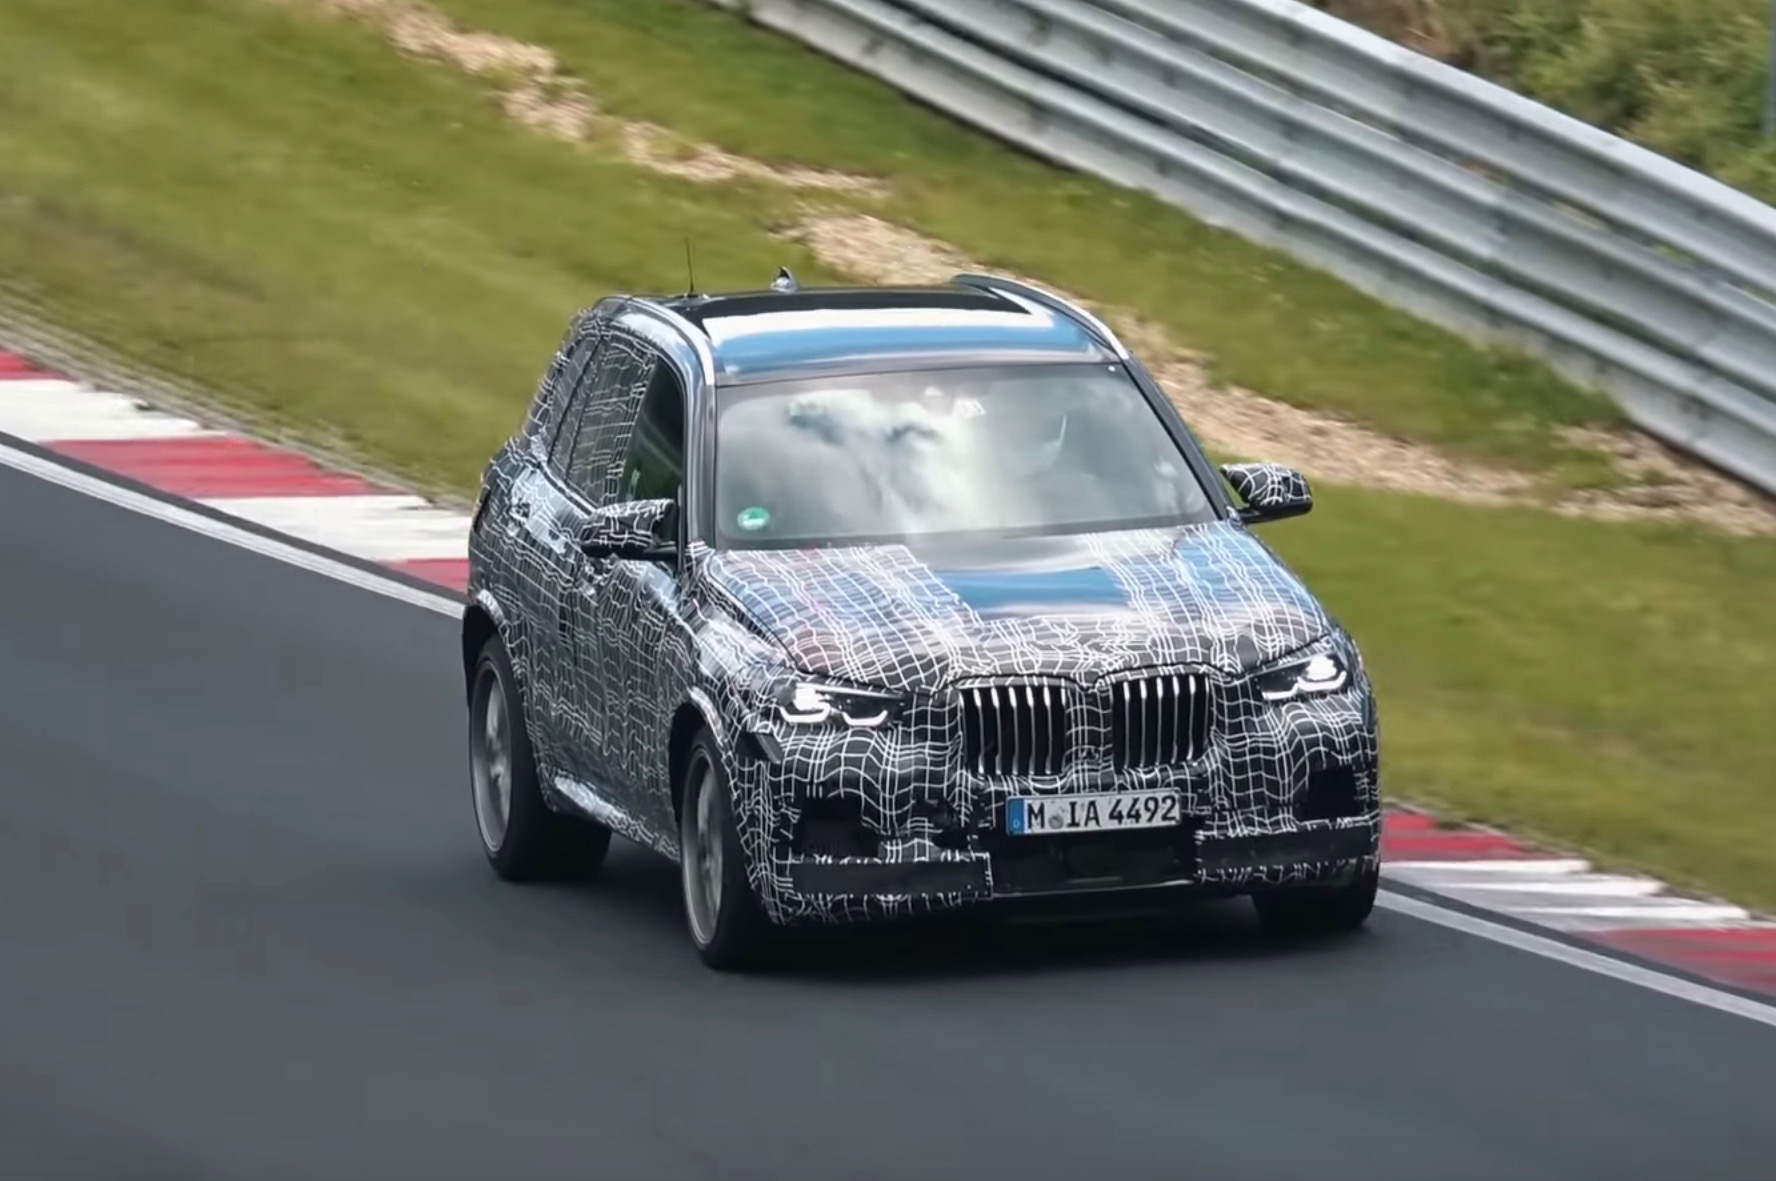 2019 BMW X5 M spotted at Nurburgring, looks fast (video)